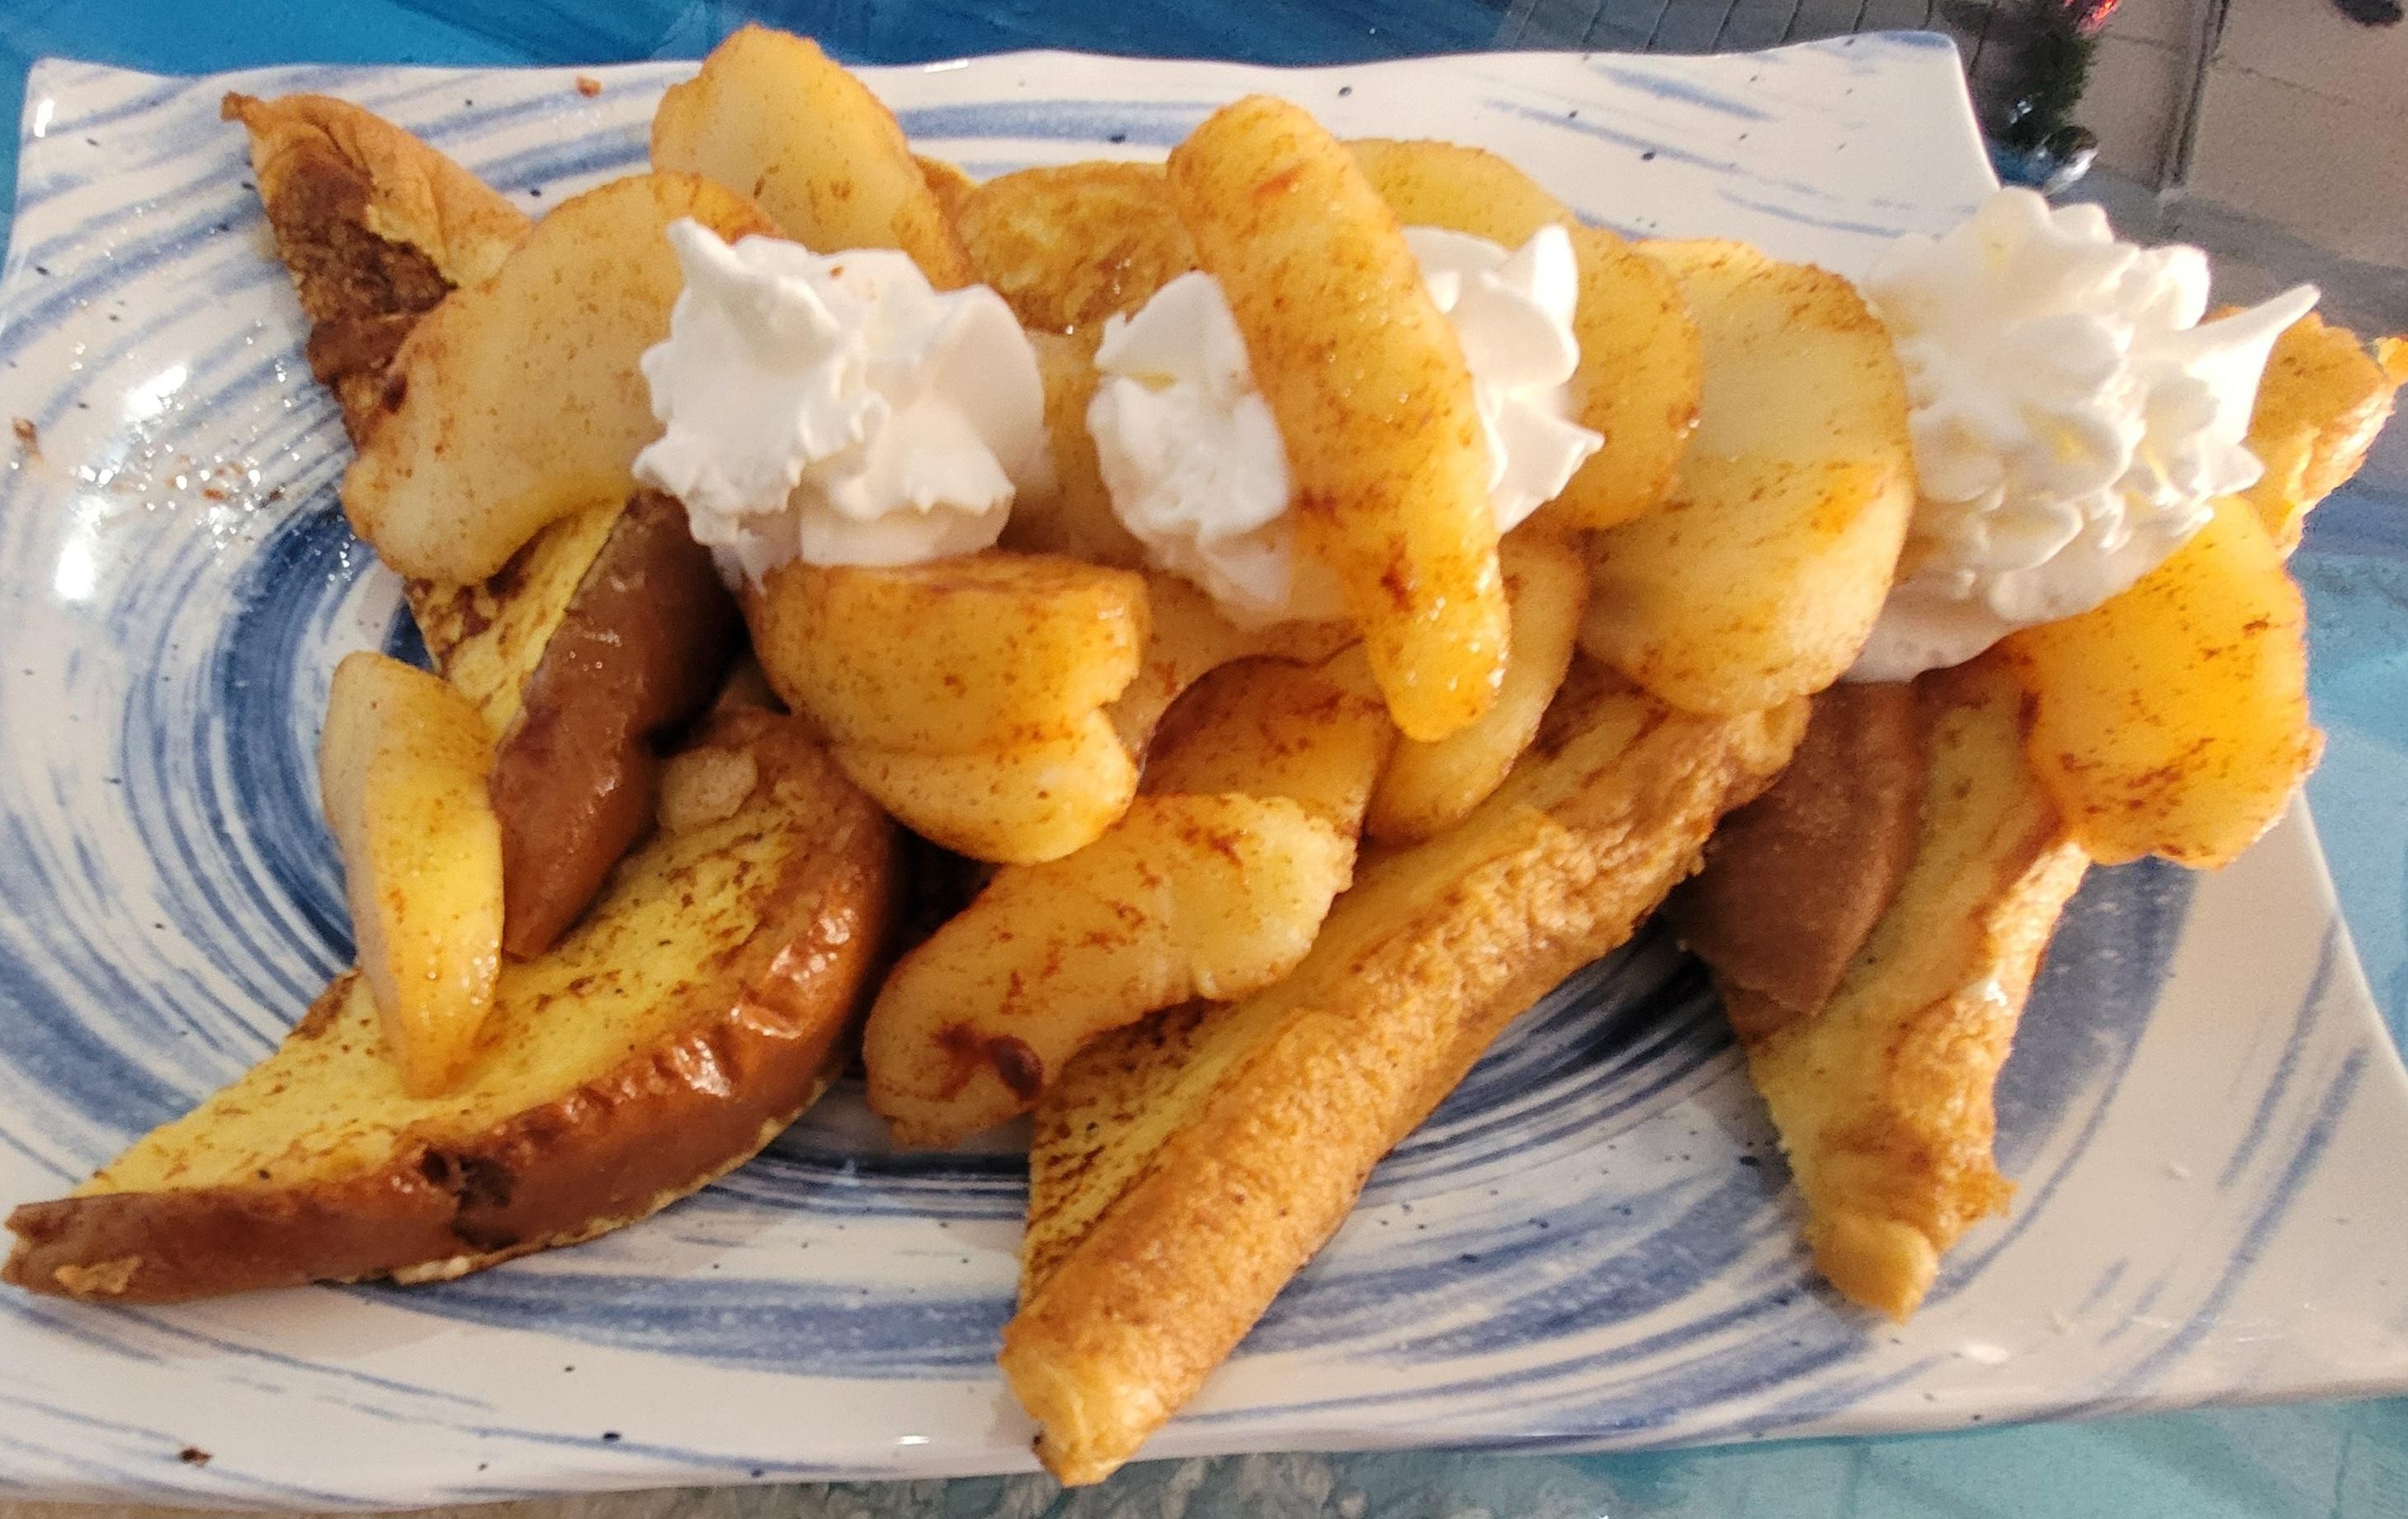 Apple French Toast